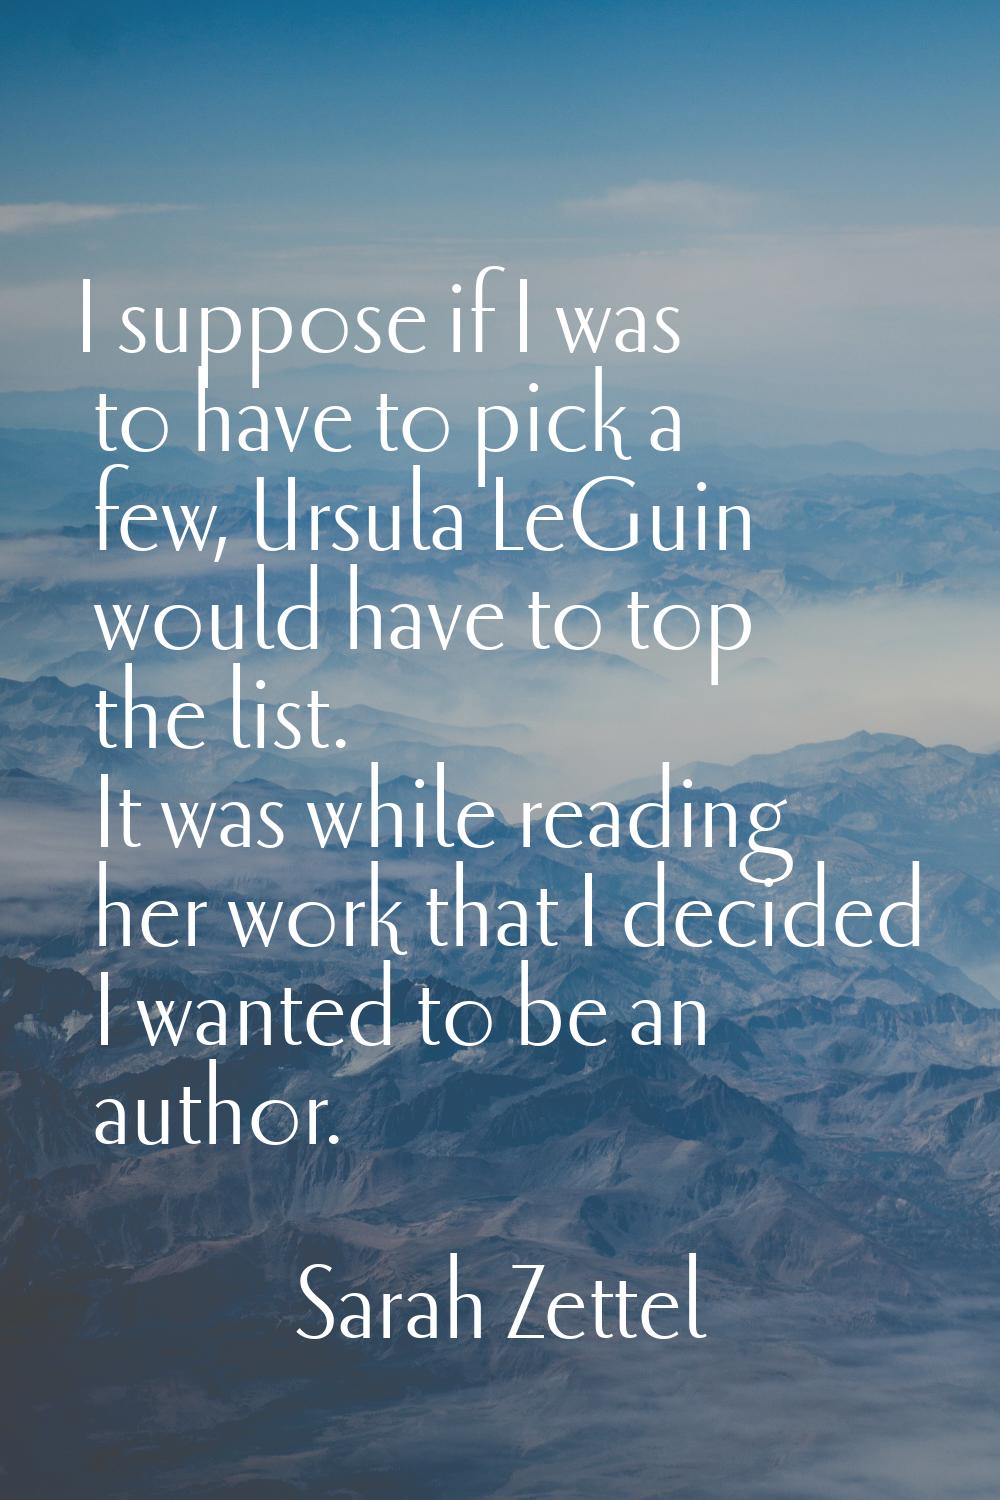 I suppose if I was to have to pick a few, Ursula LeGuin would have to top the list. It was while re